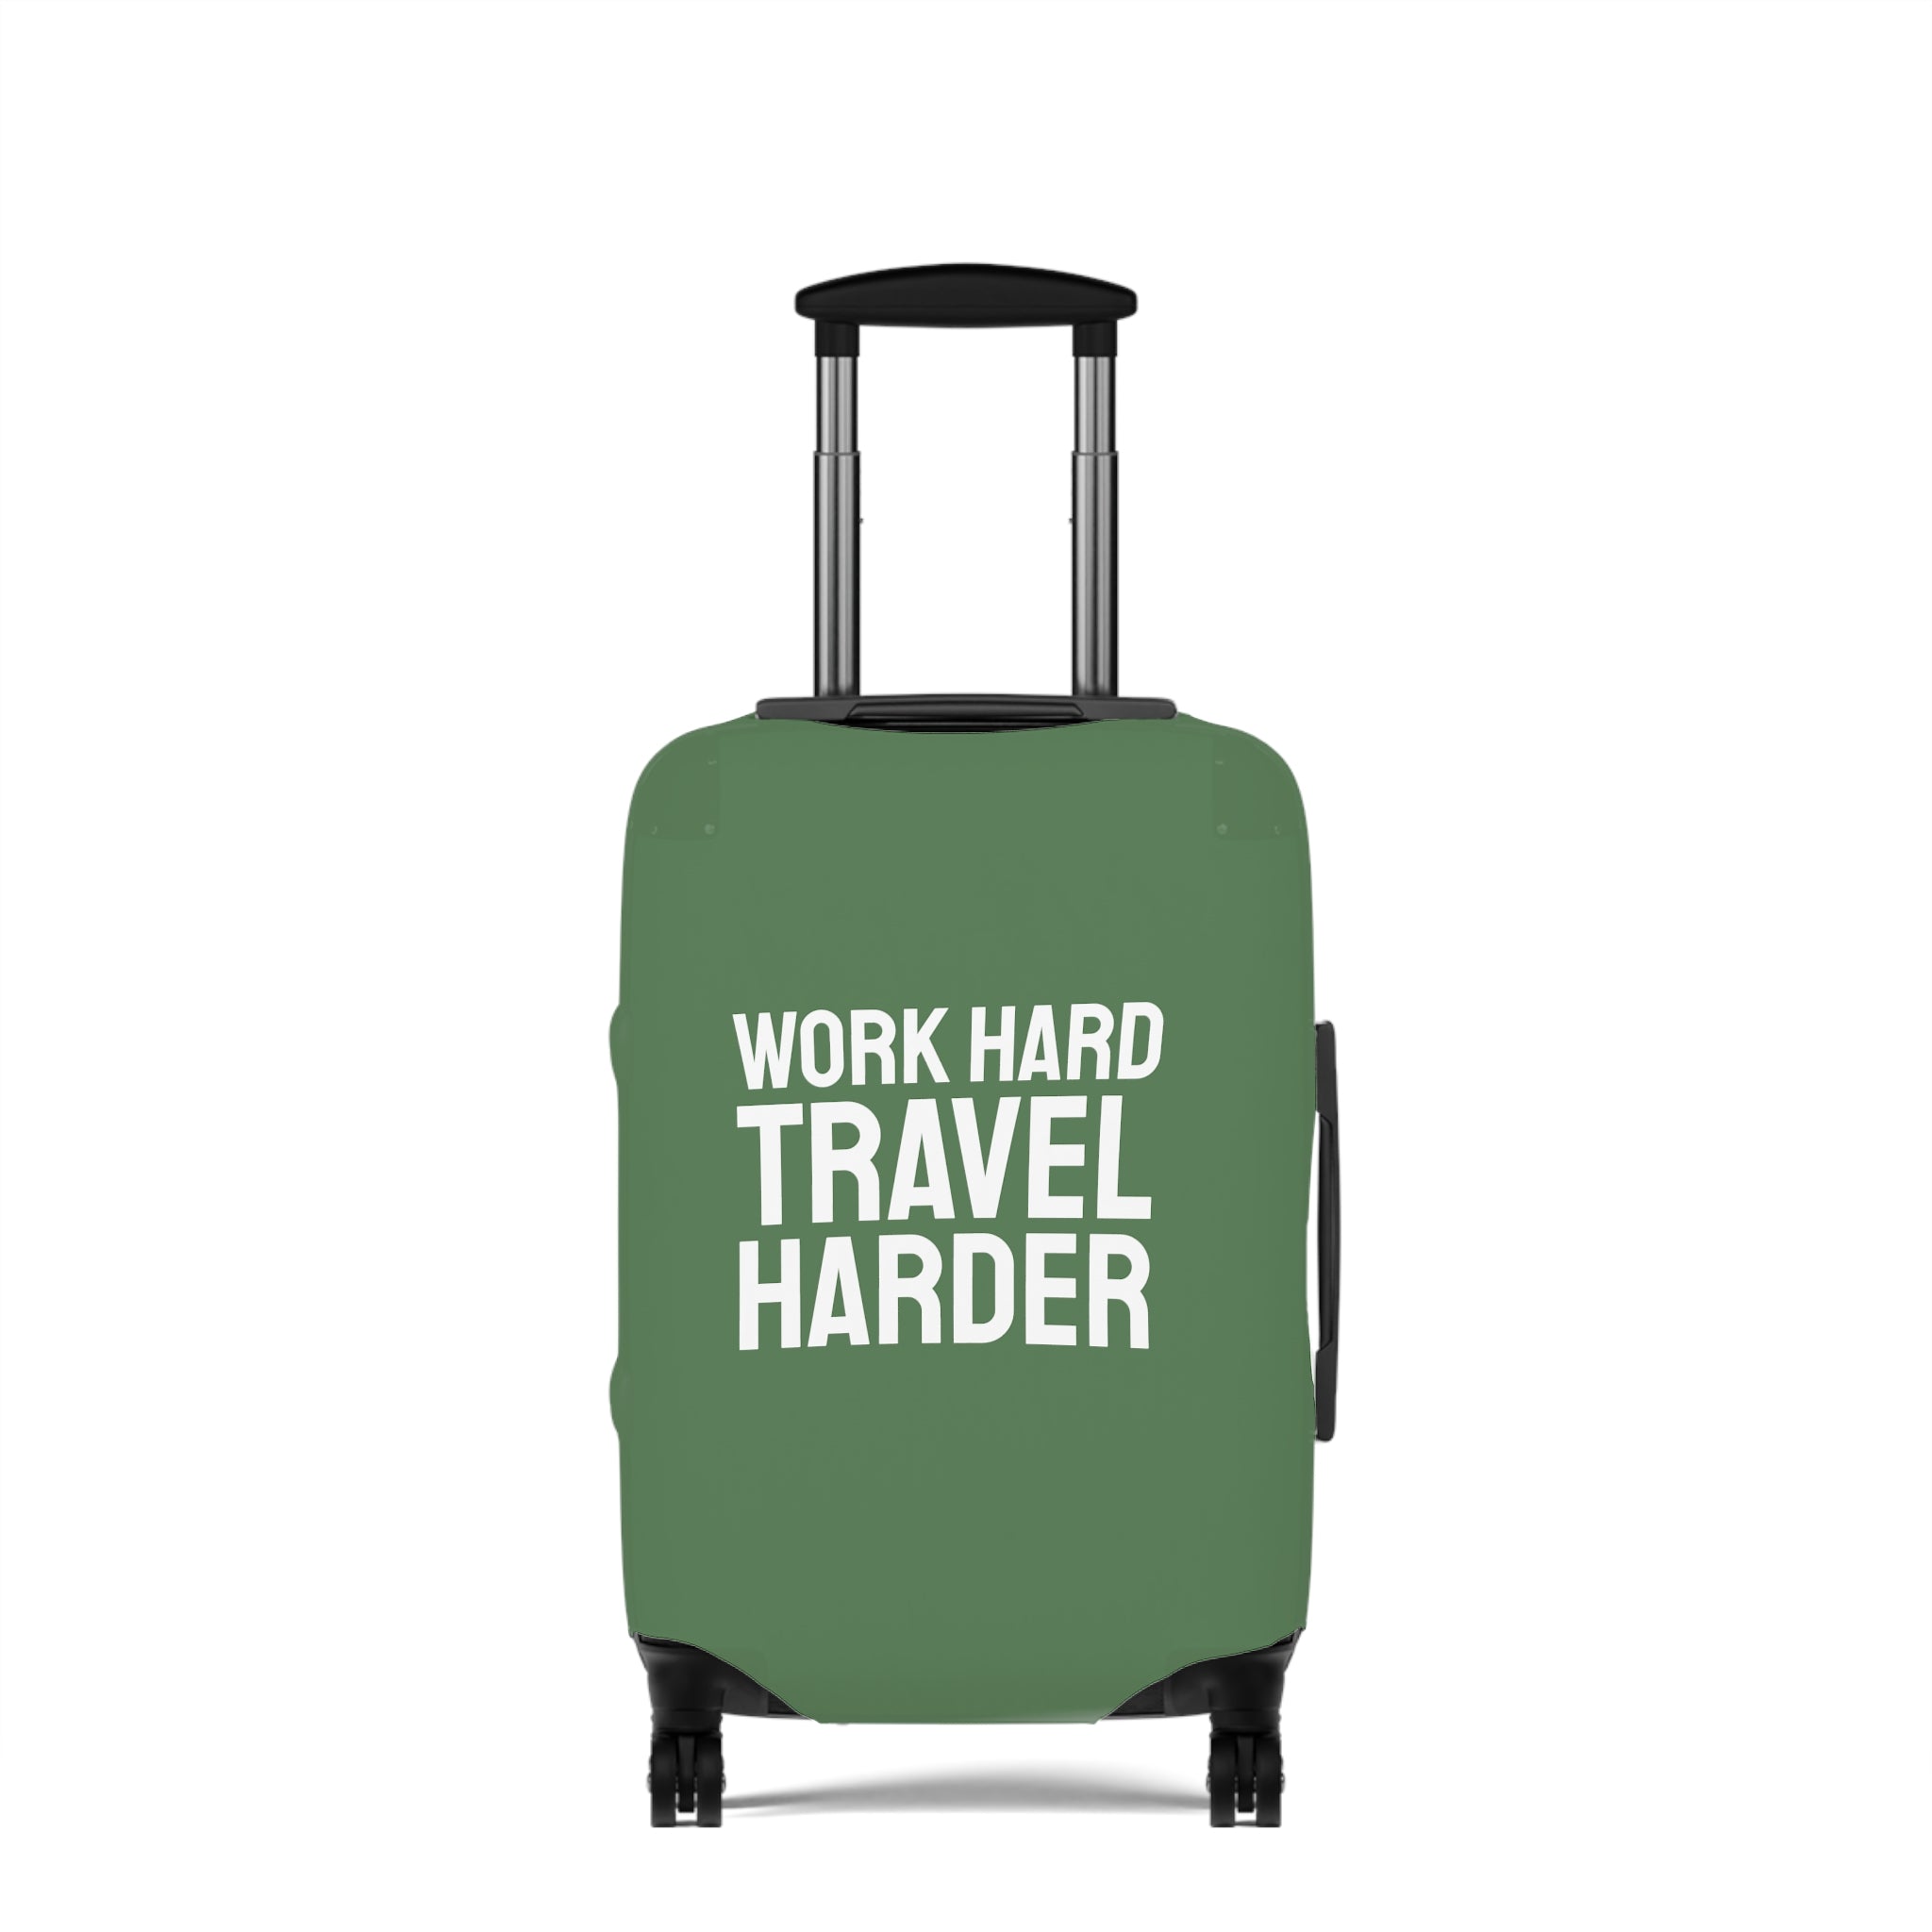 Work hard travel harder Luggage Cover (Green)